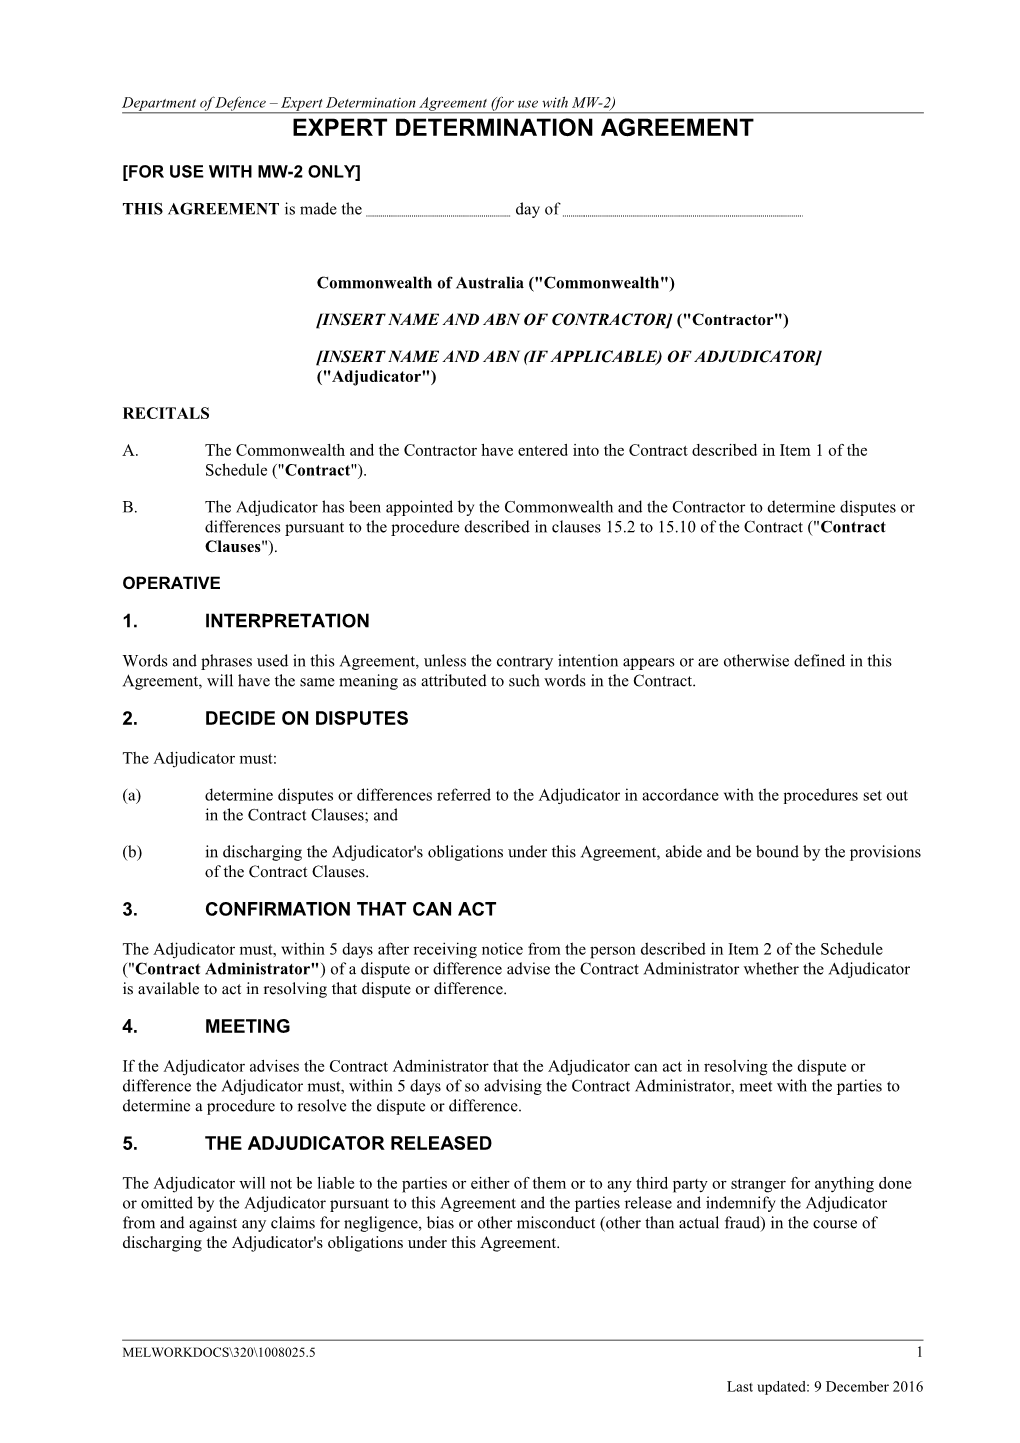 Department of Defence Expert Determination Agreement (For Use with MW-2)